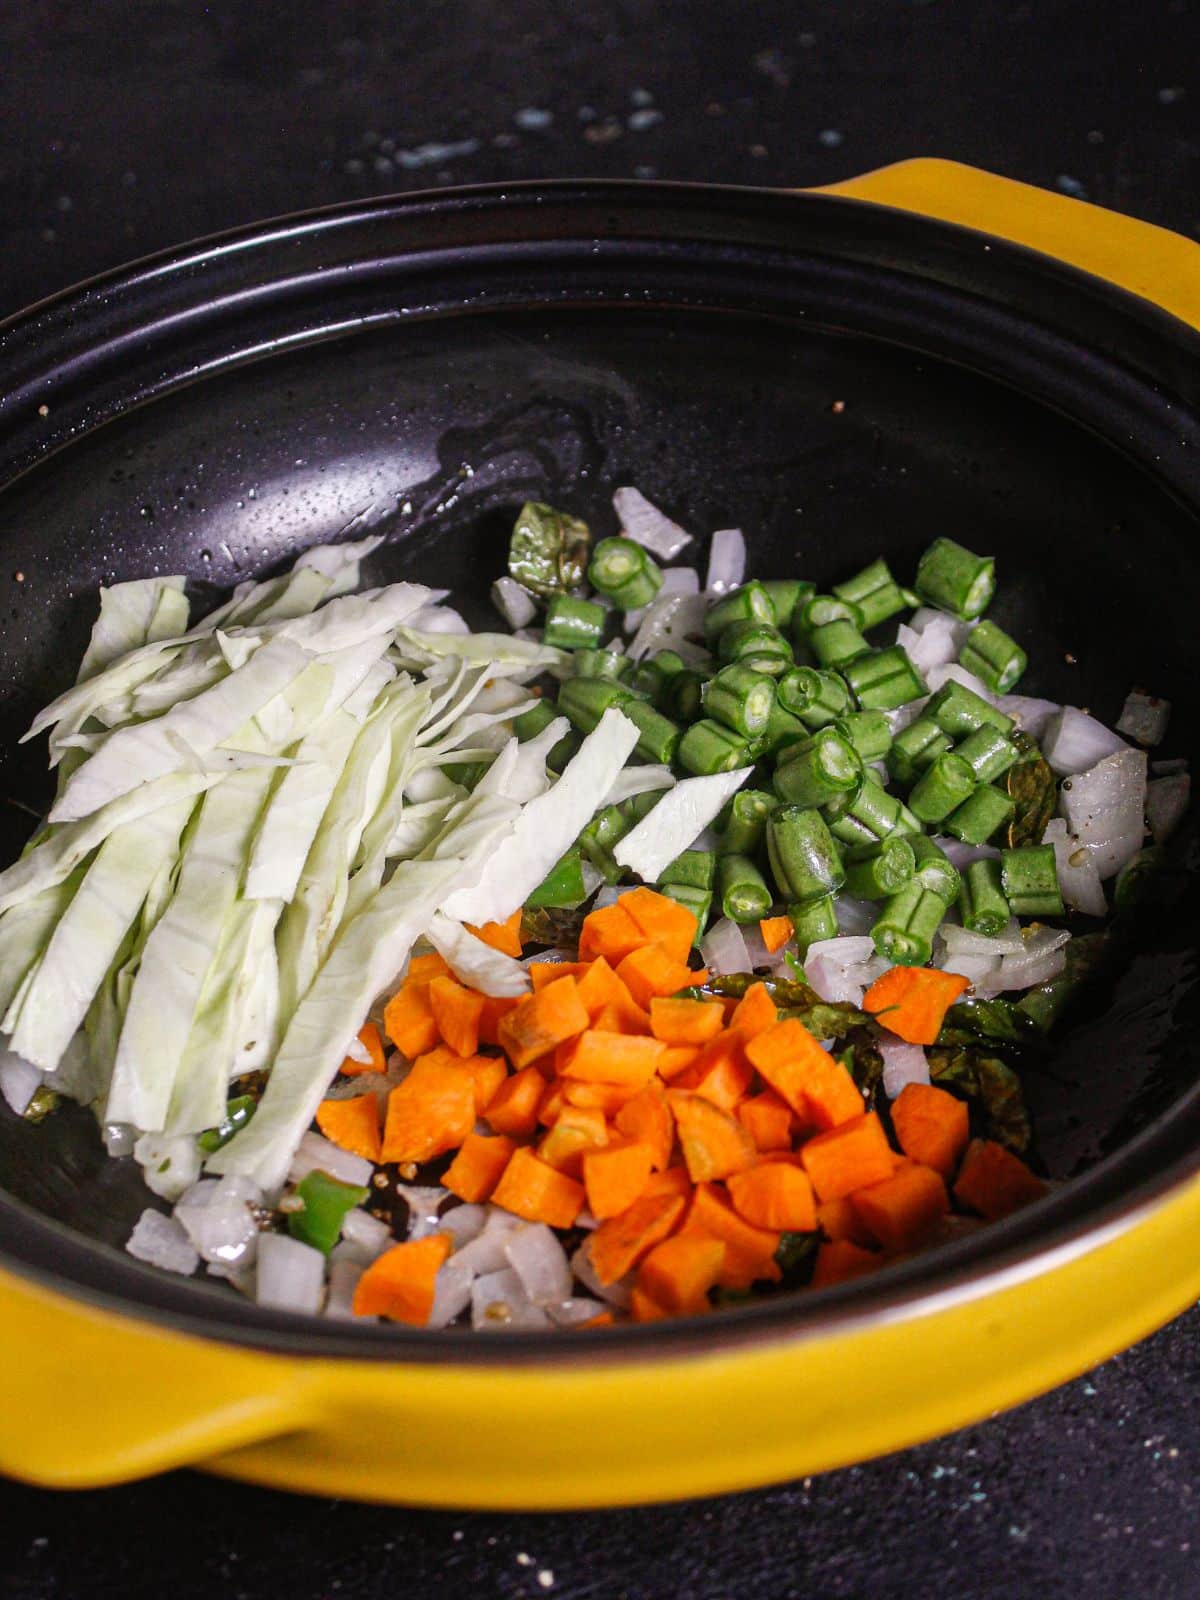 Add all the vegetables to the pan and mix well